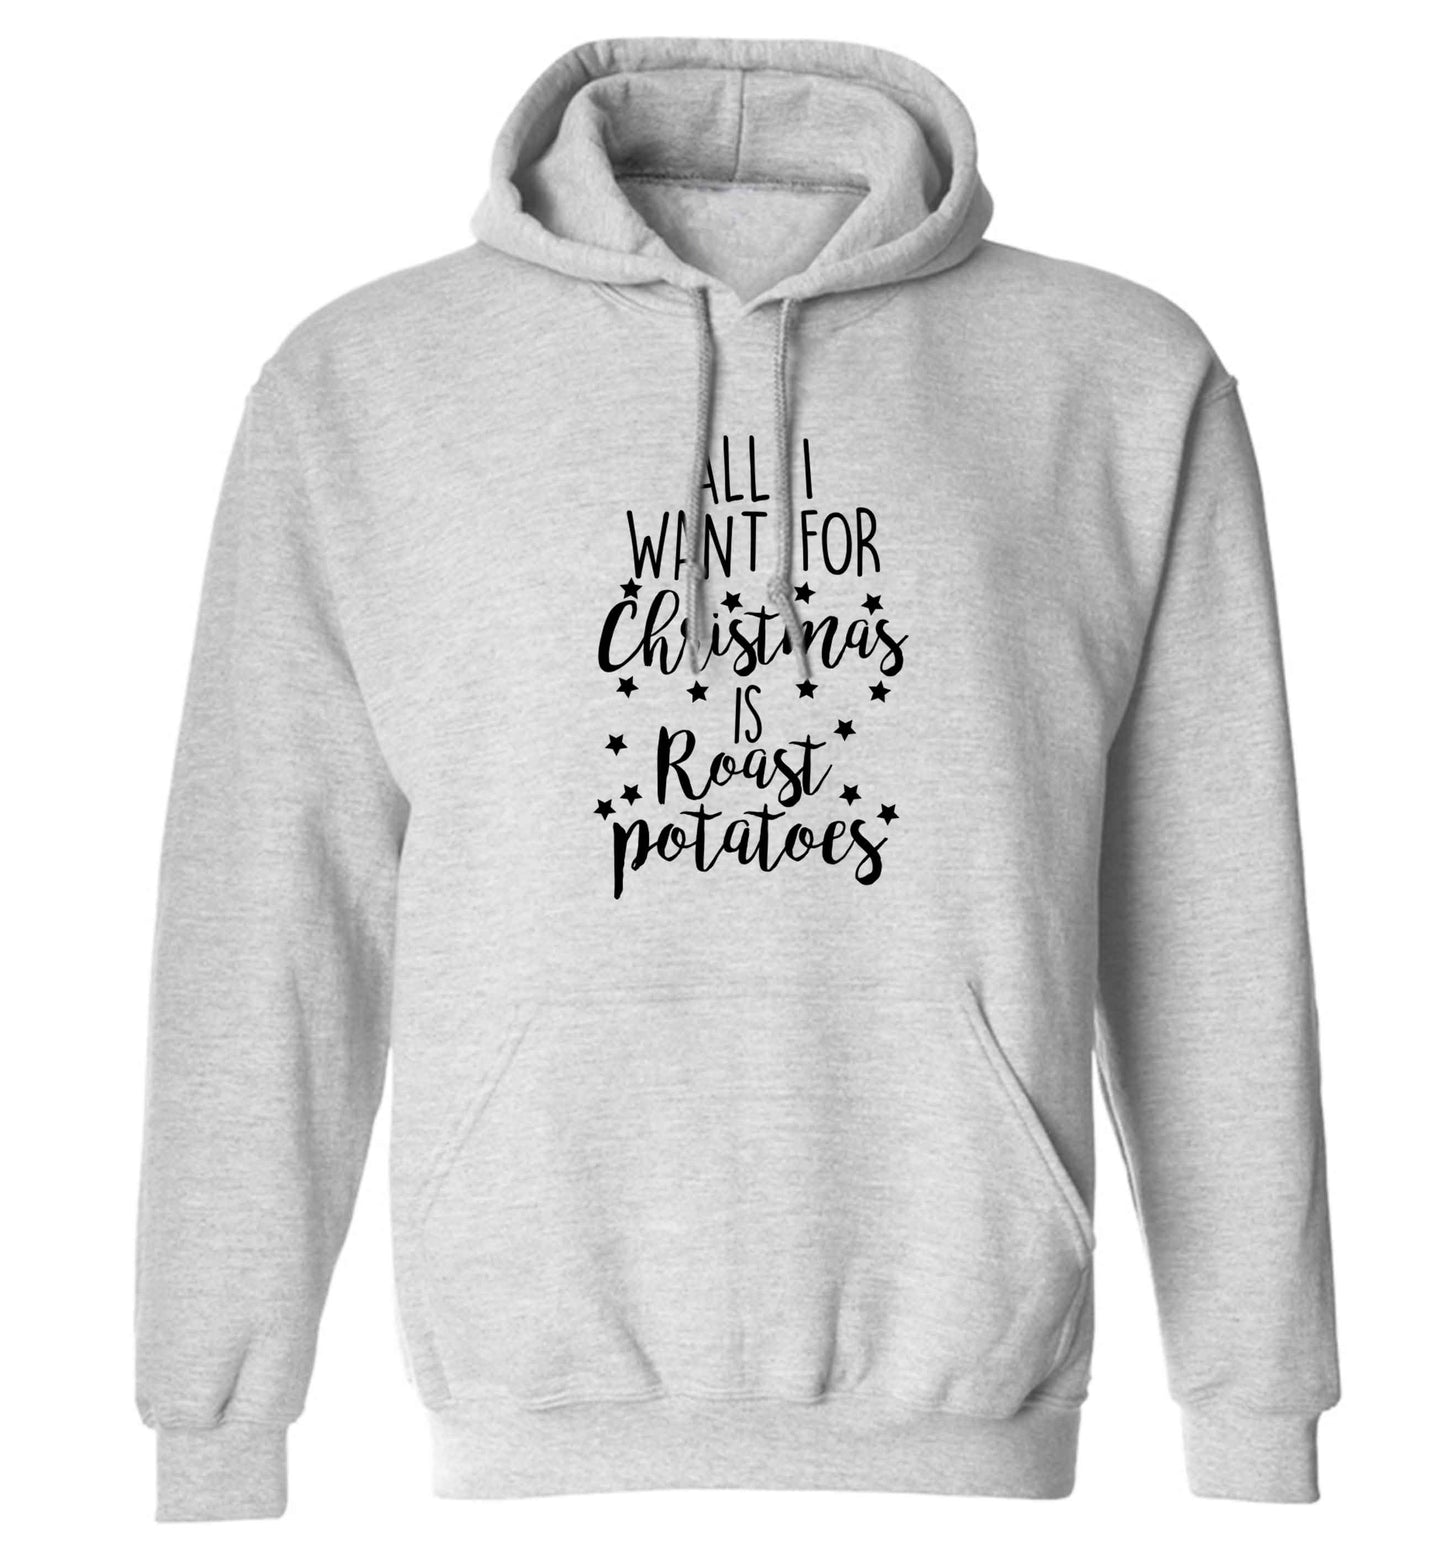 All I want for Christmas is roast potatoes adults unisex grey hoodie 2XL